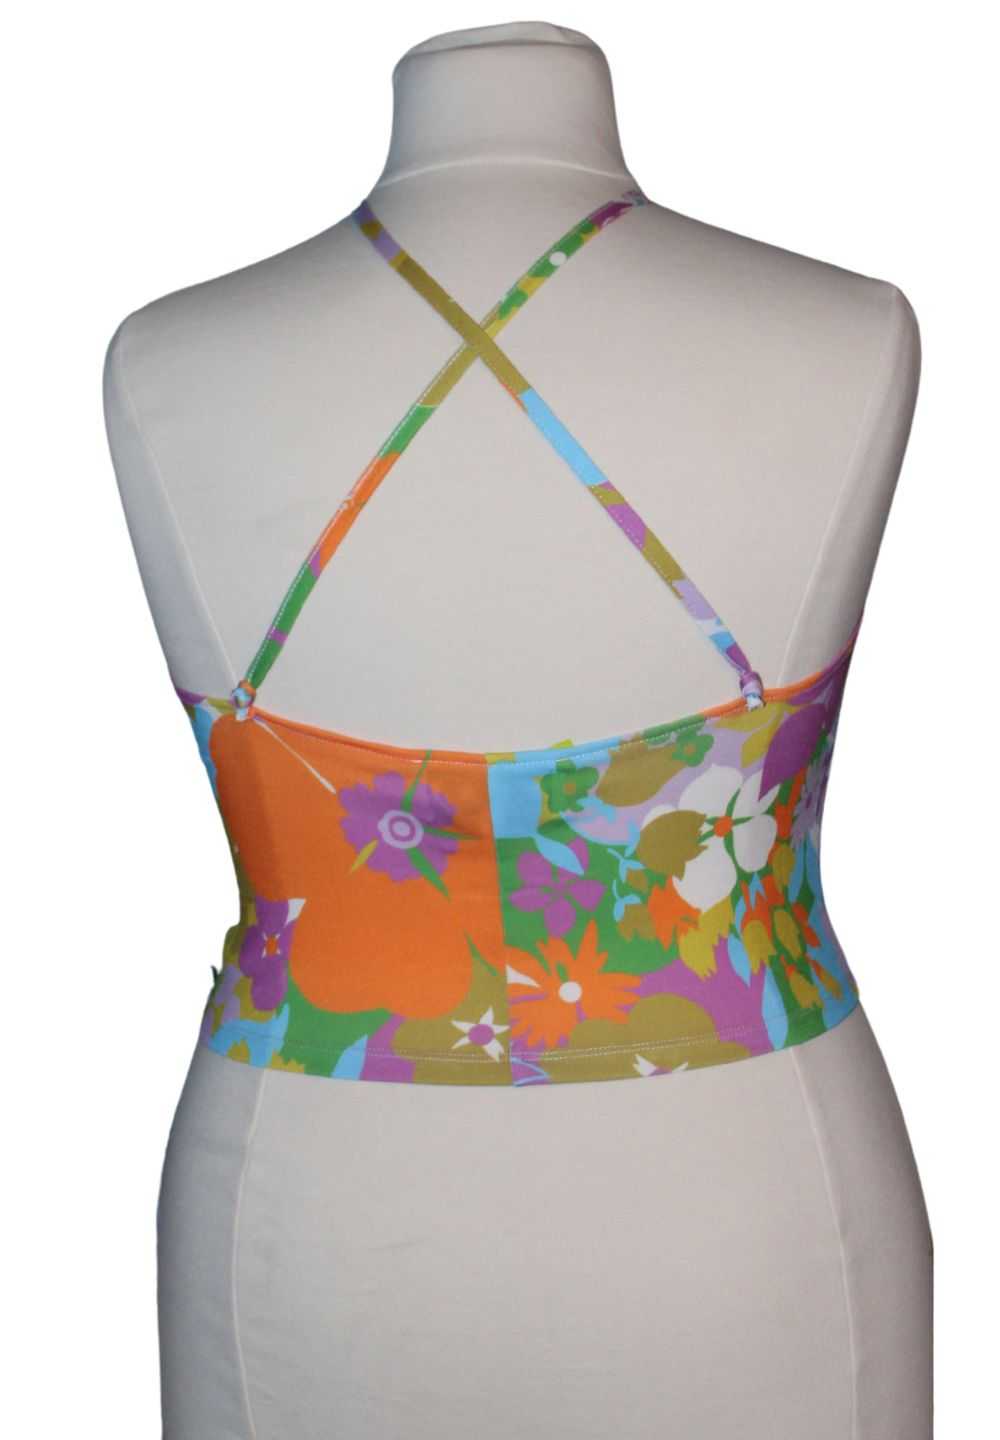 WRAY Floral Crop Top, Size 2XL - image 2